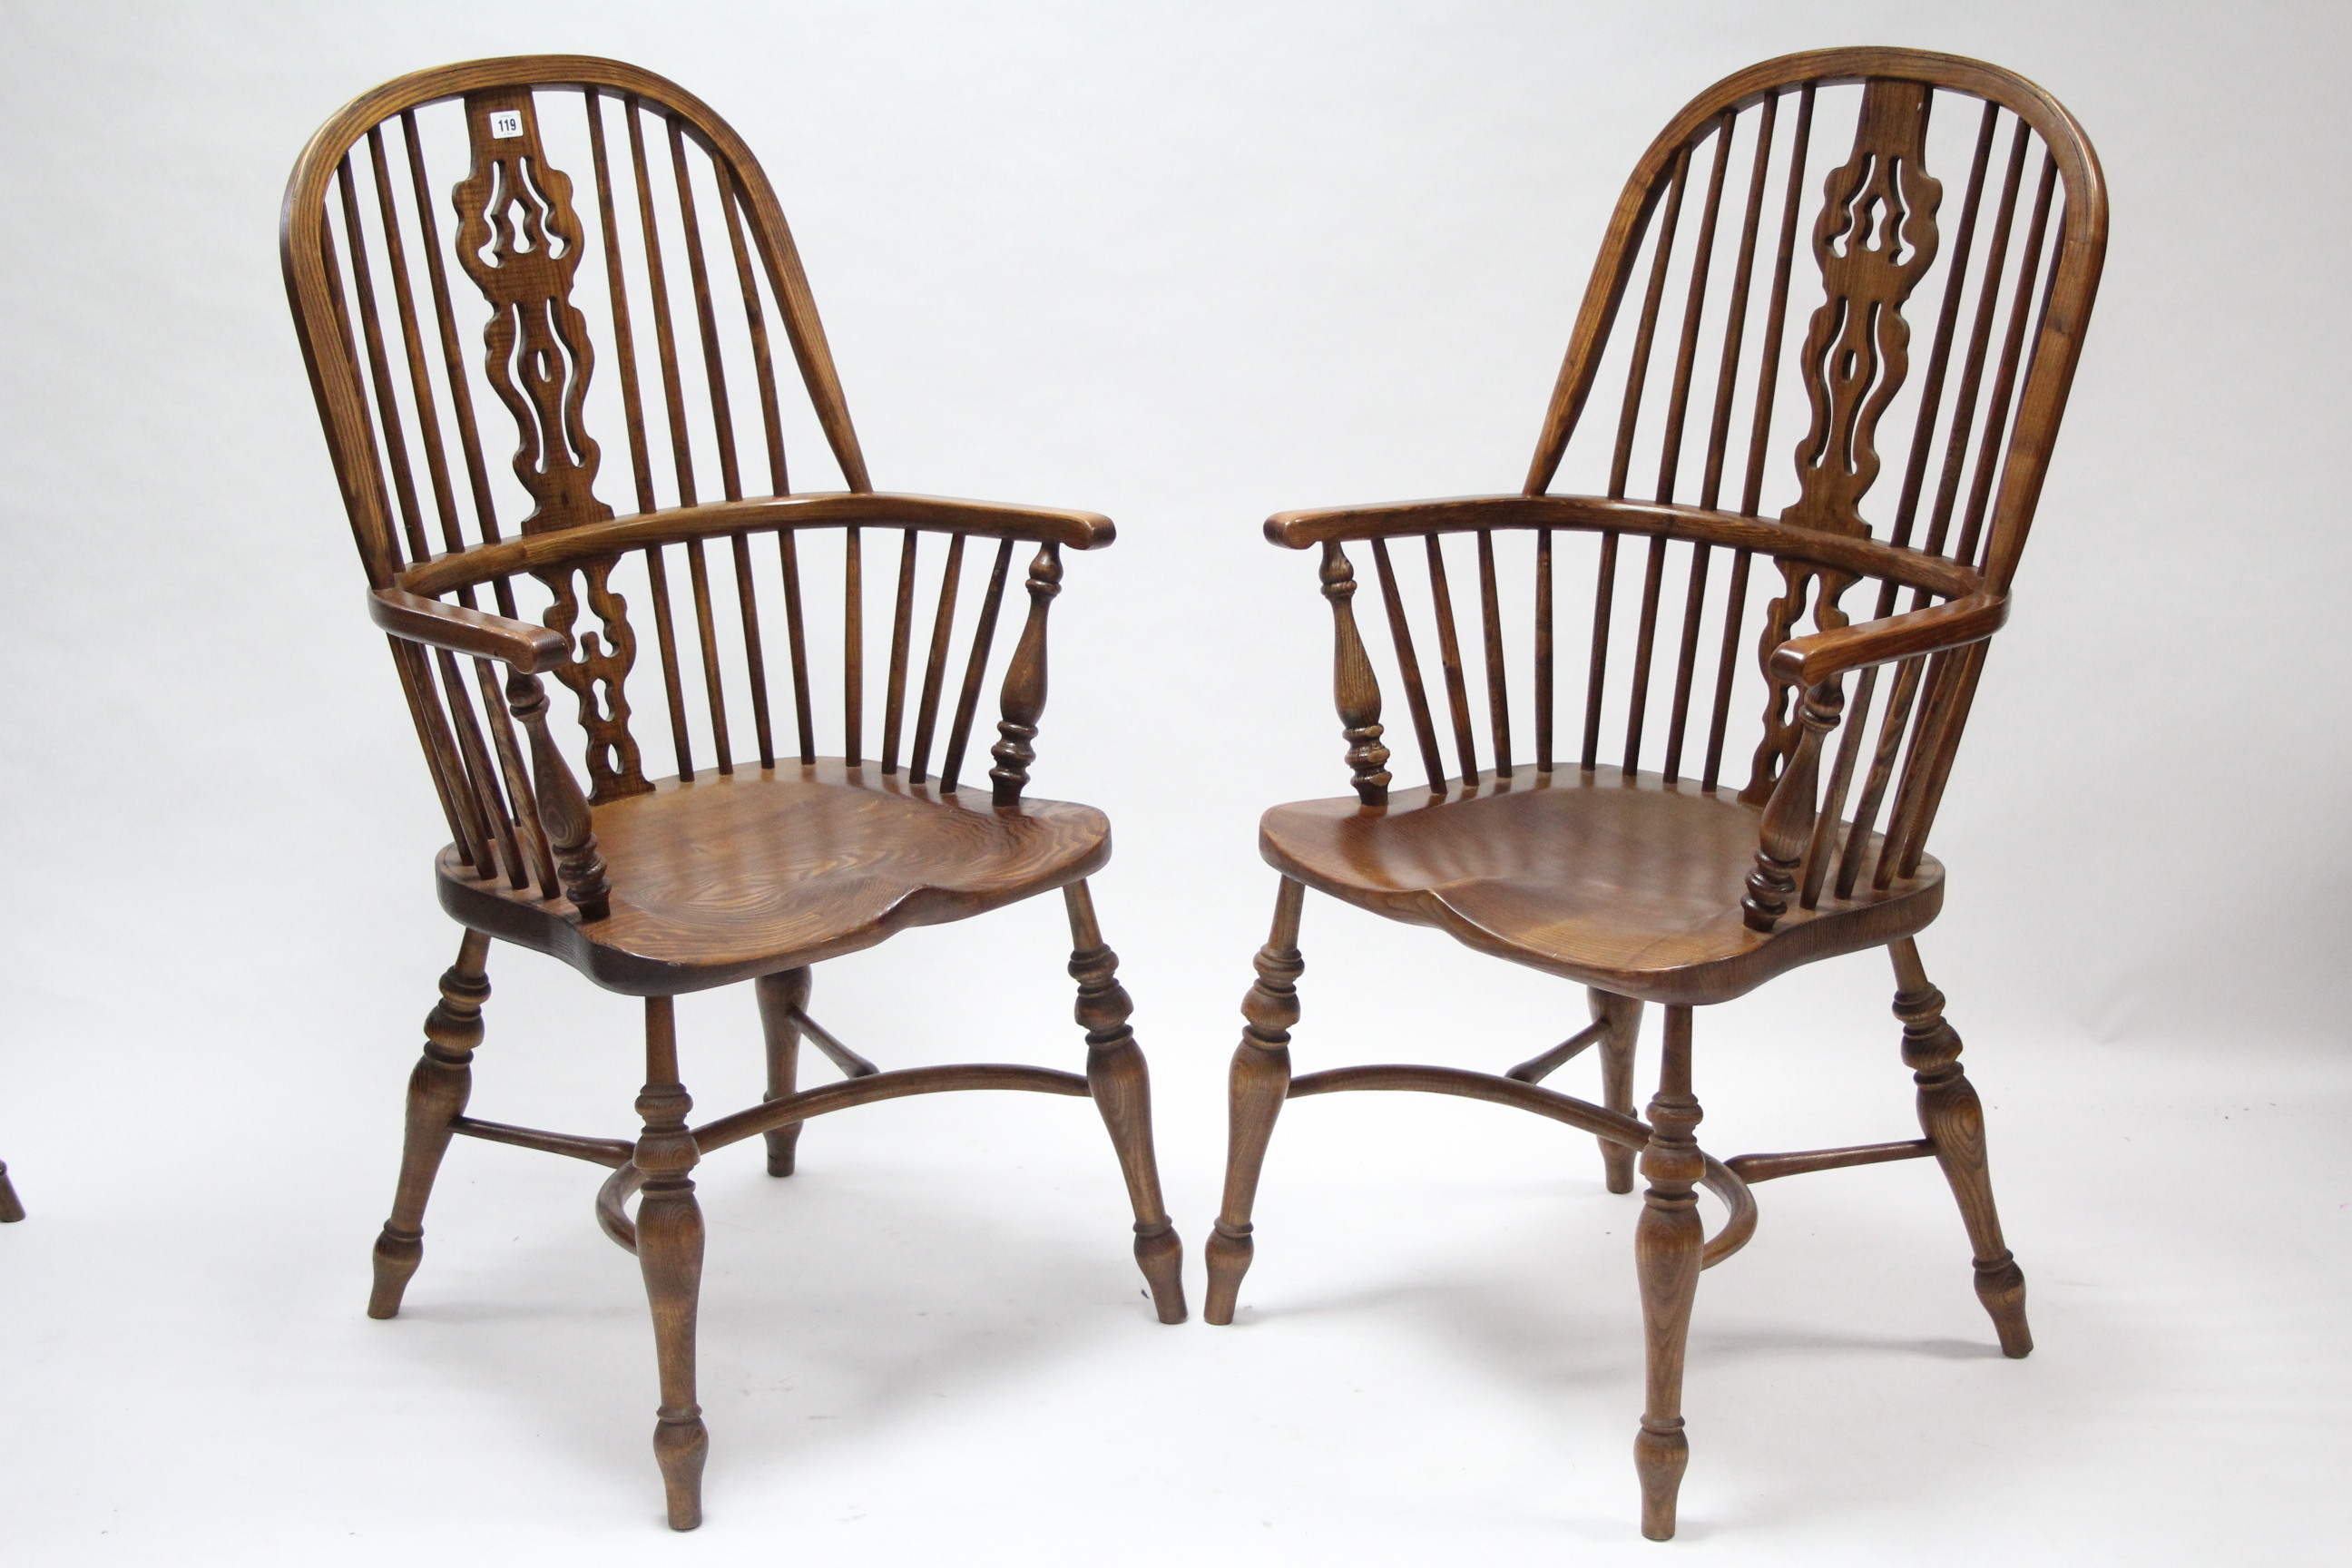 GOOD QUALITY SET OF SIX 19th CENTURY WINDSOR-STYLE DINING CHAIRS (including a pair of carvers), with - Image 4 of 7